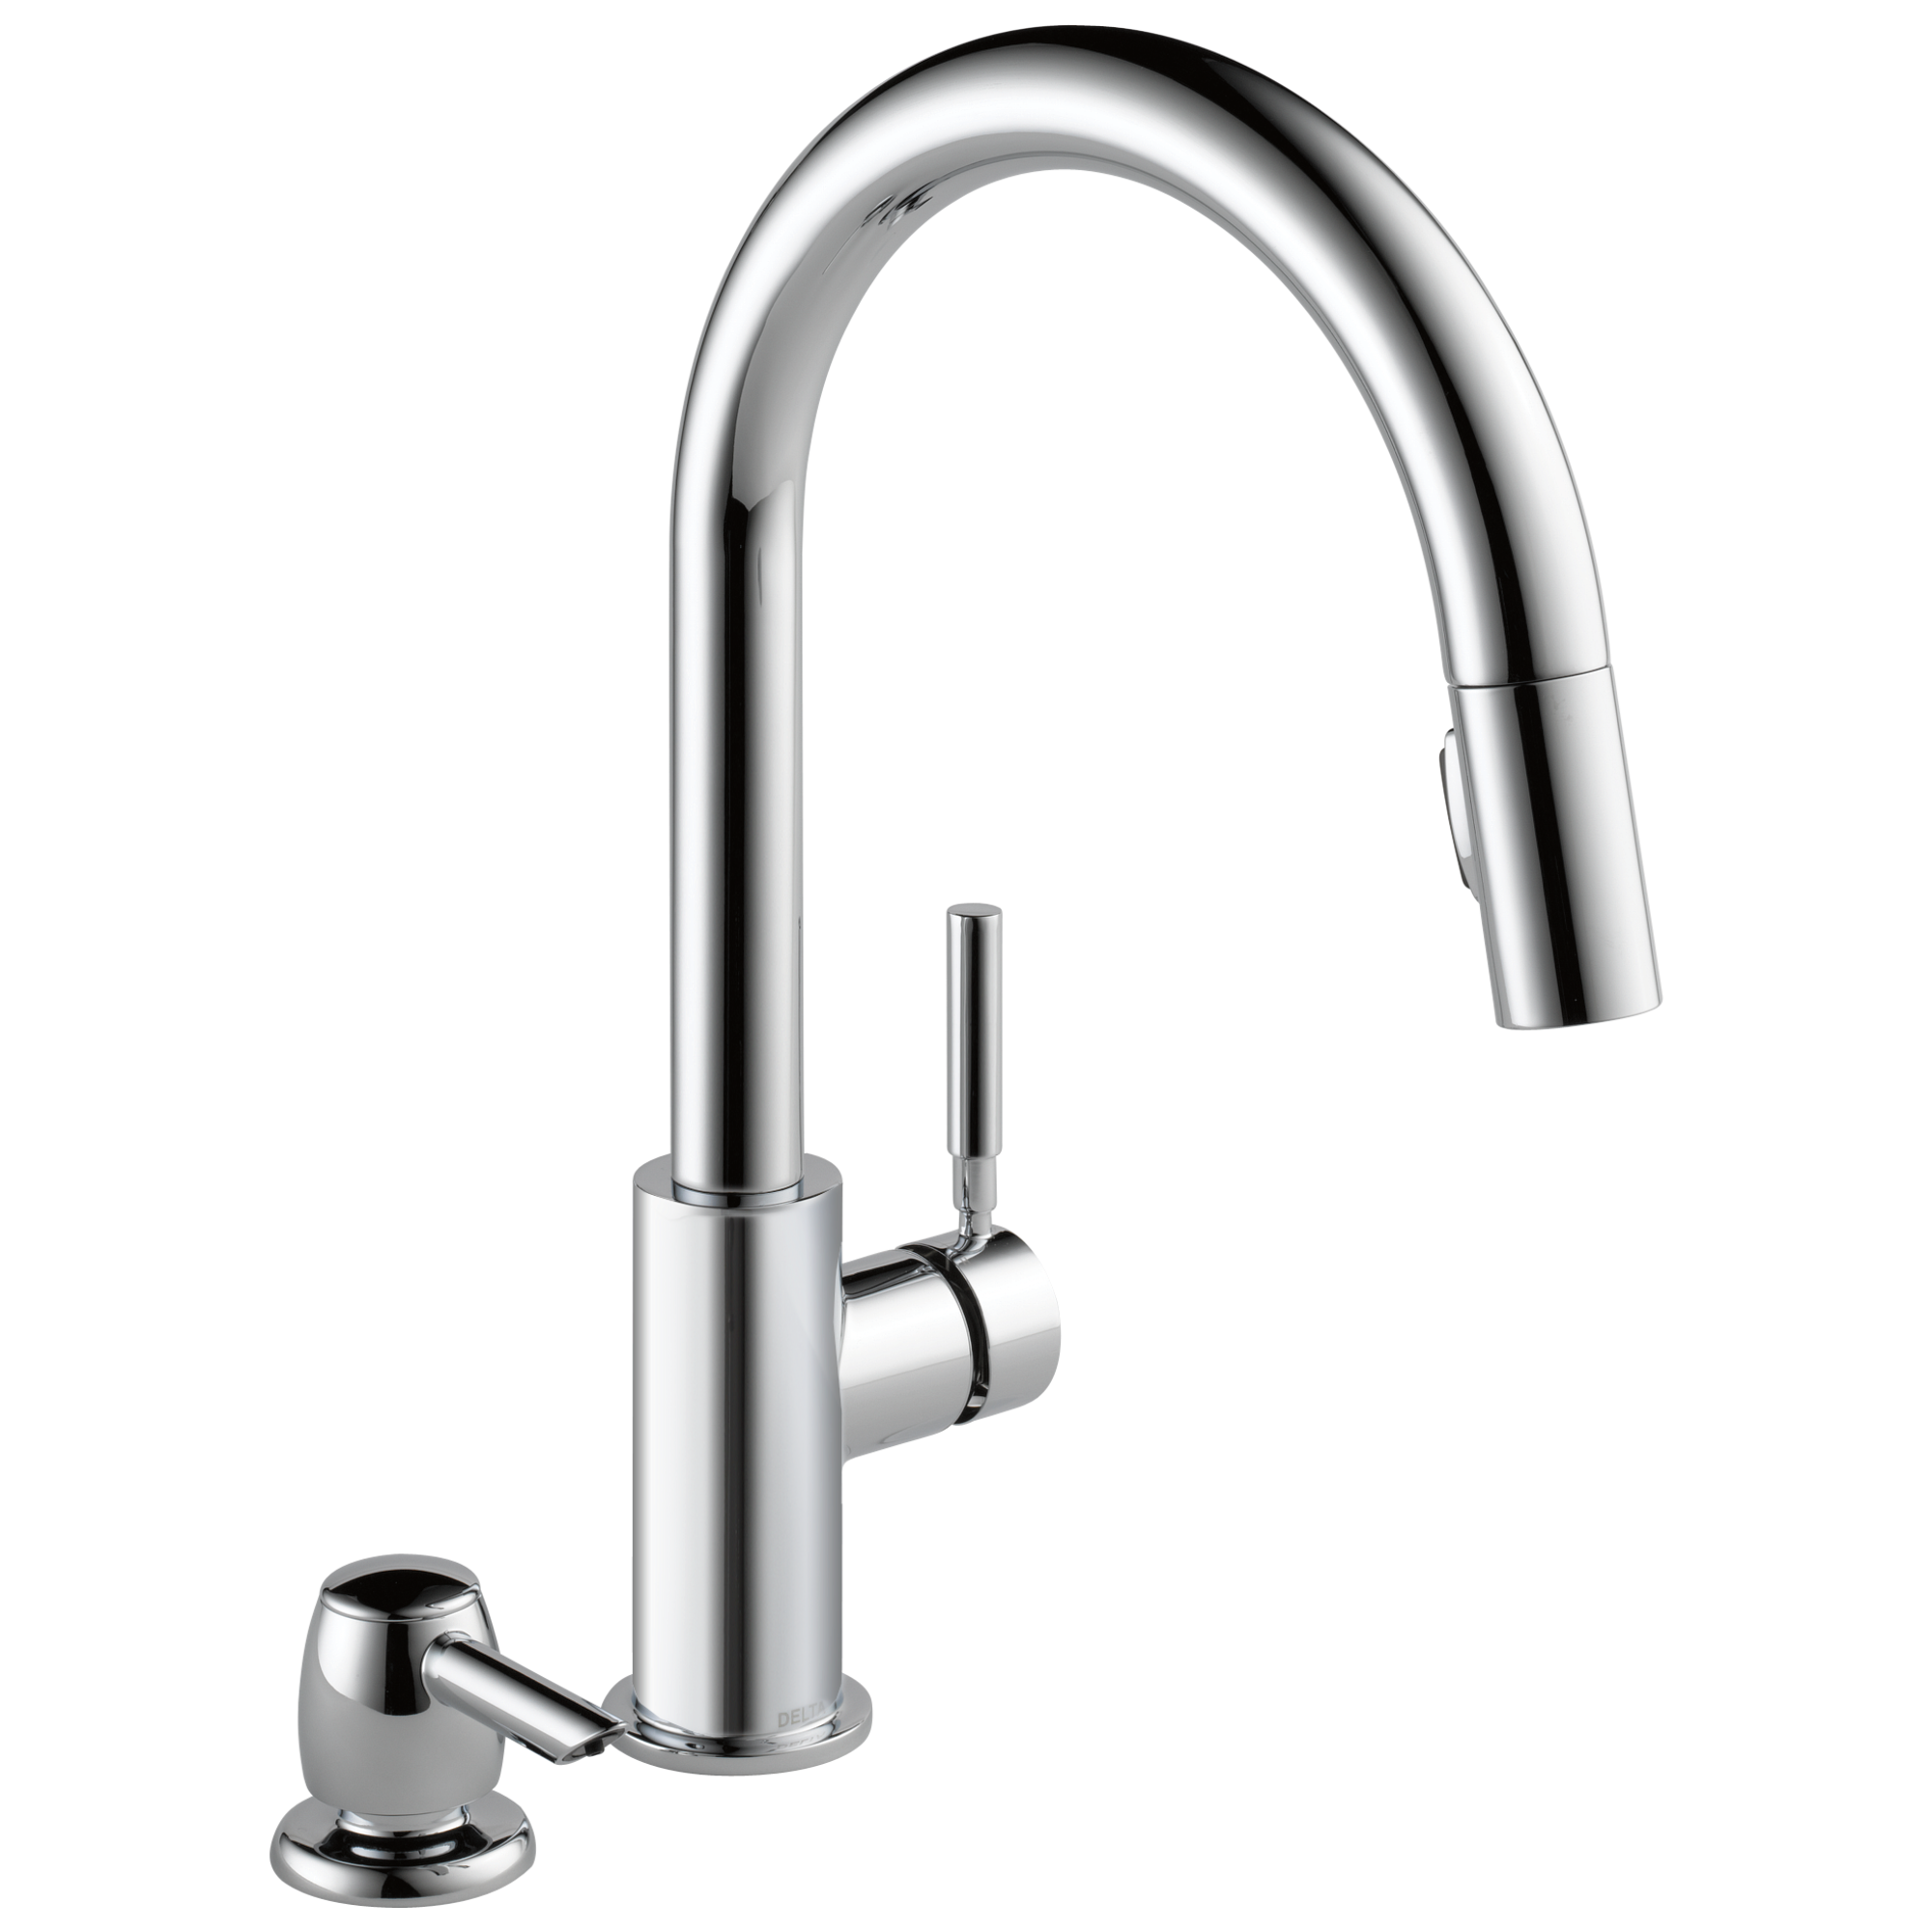 Trask Chrome Single Handle Pull-down Kitchen Faucet with Deck Plate and Soap Dispenser Included Rubber | - Delta 19933-SD-DST